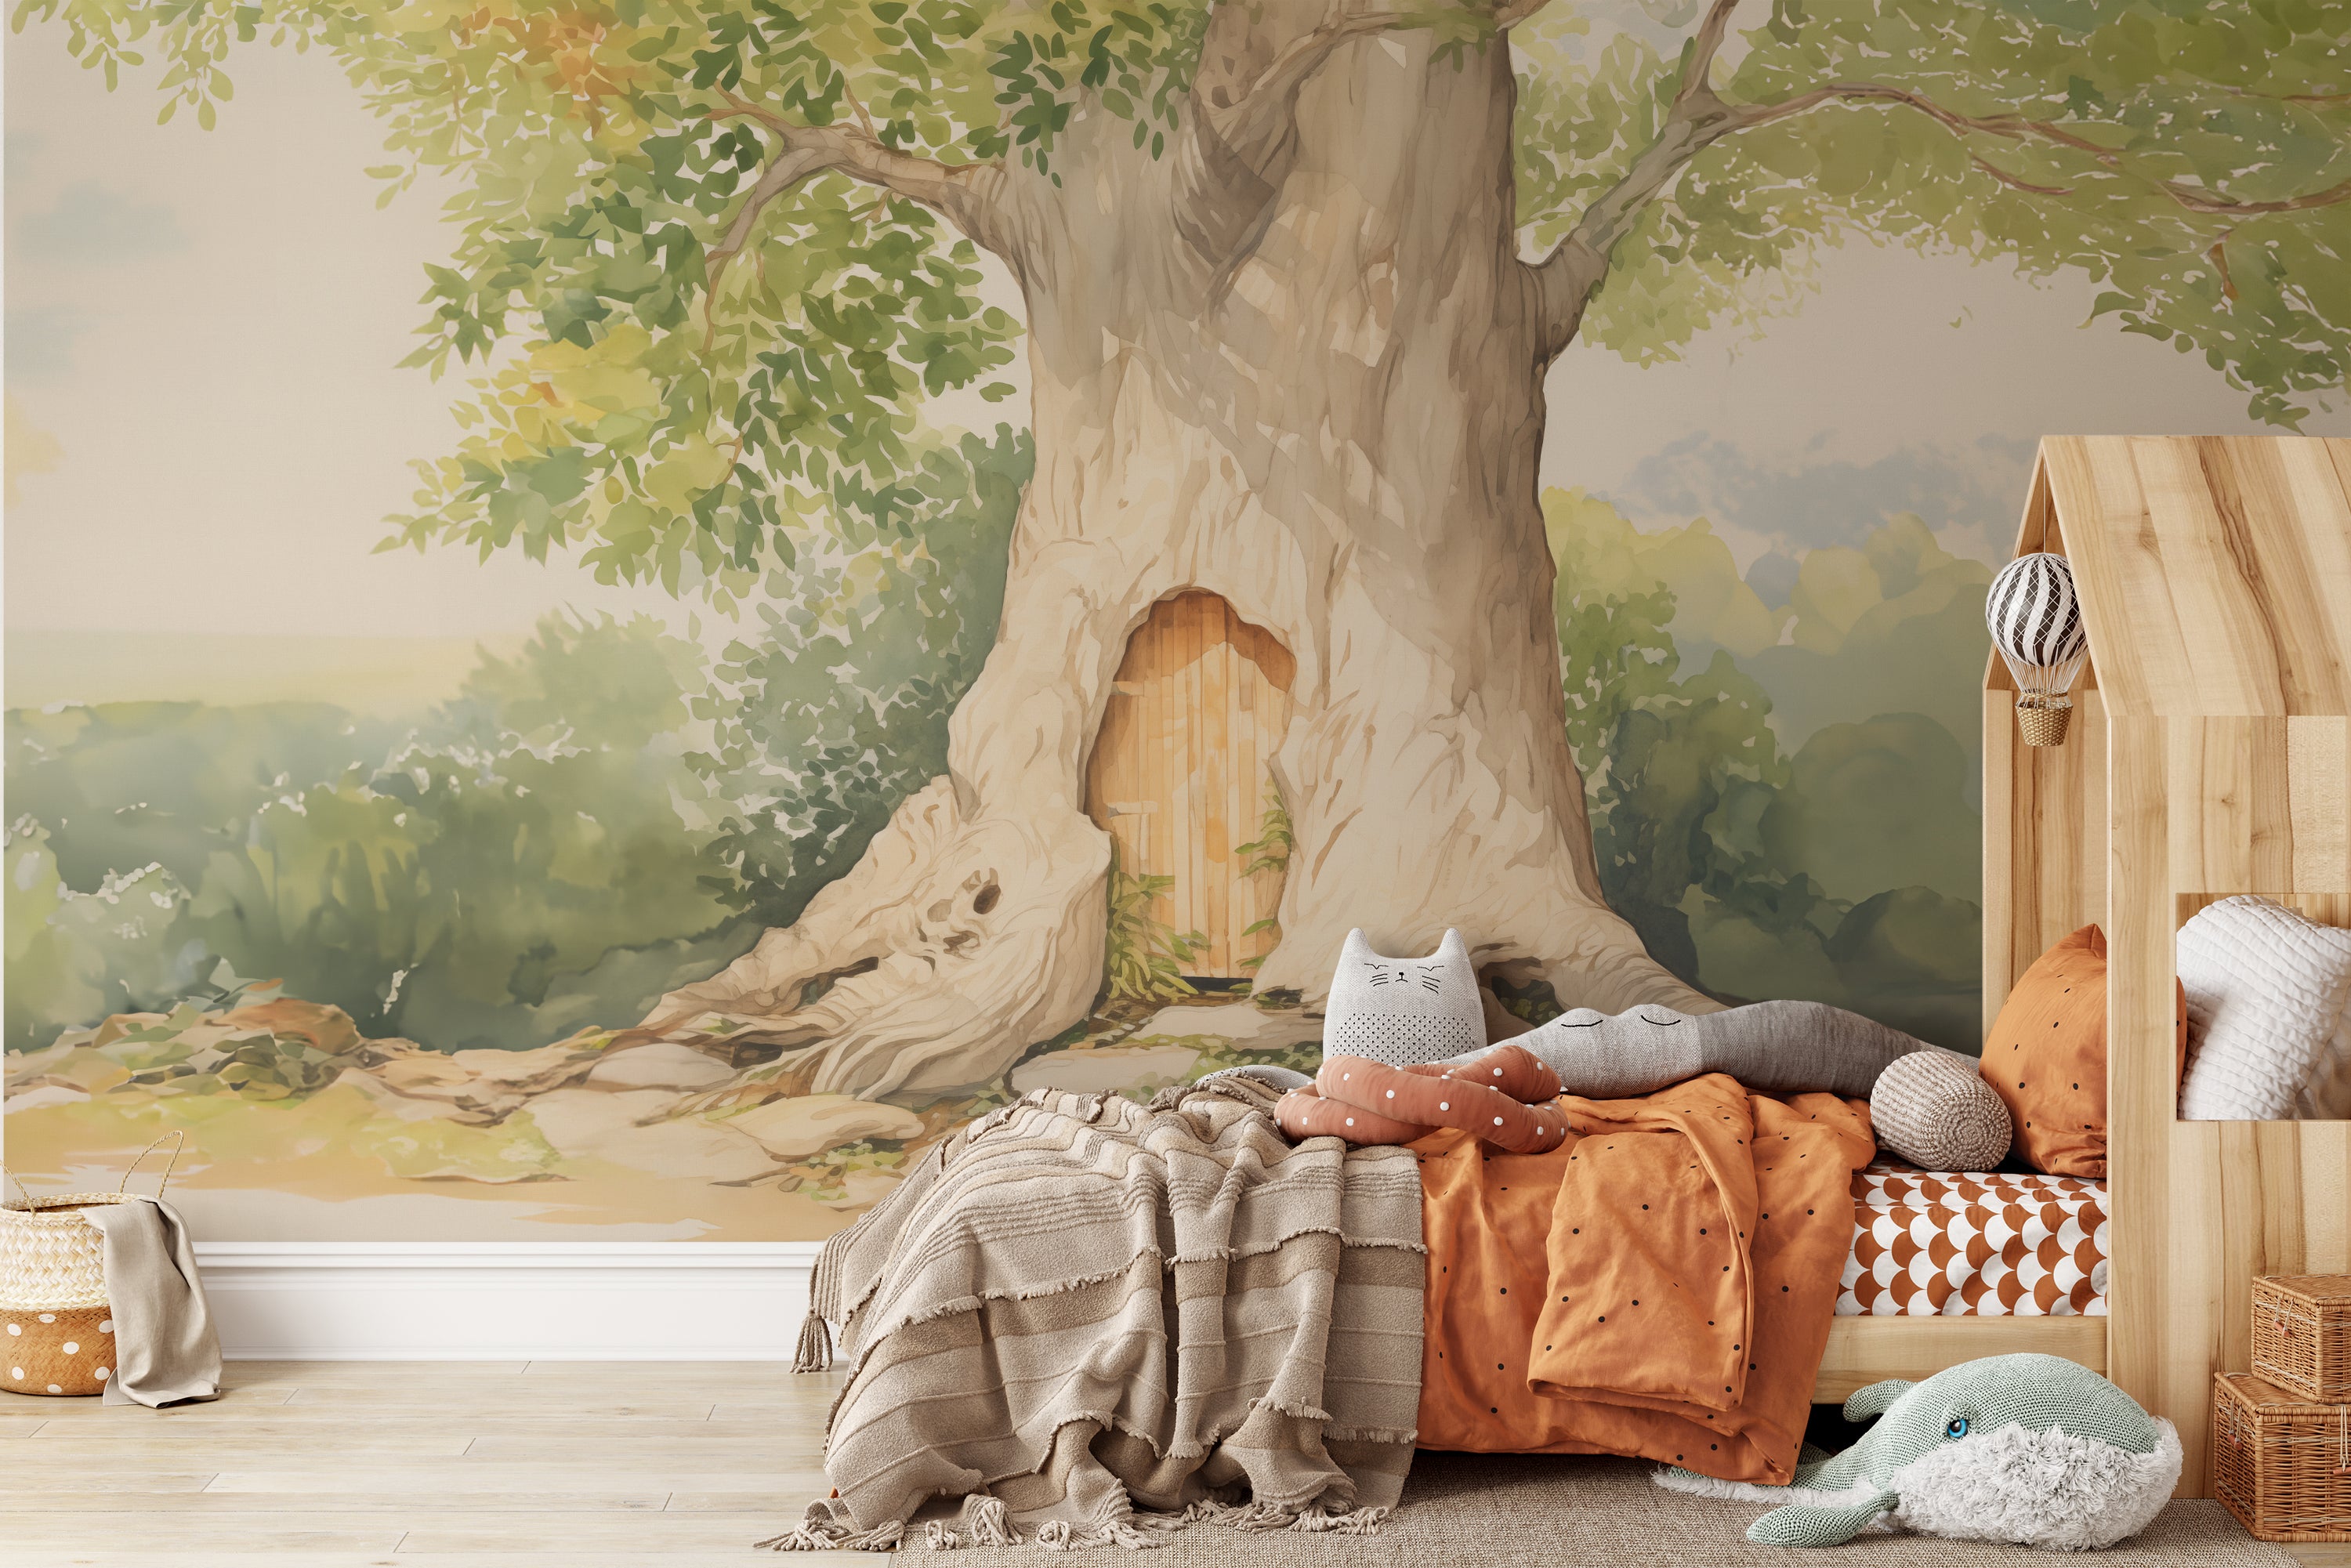 A cozy child's bedroom with a mural depicting Winnie the Pooh's tree house, complete with a warm, inviting door and surrounded by a forest of green leaves and branches."